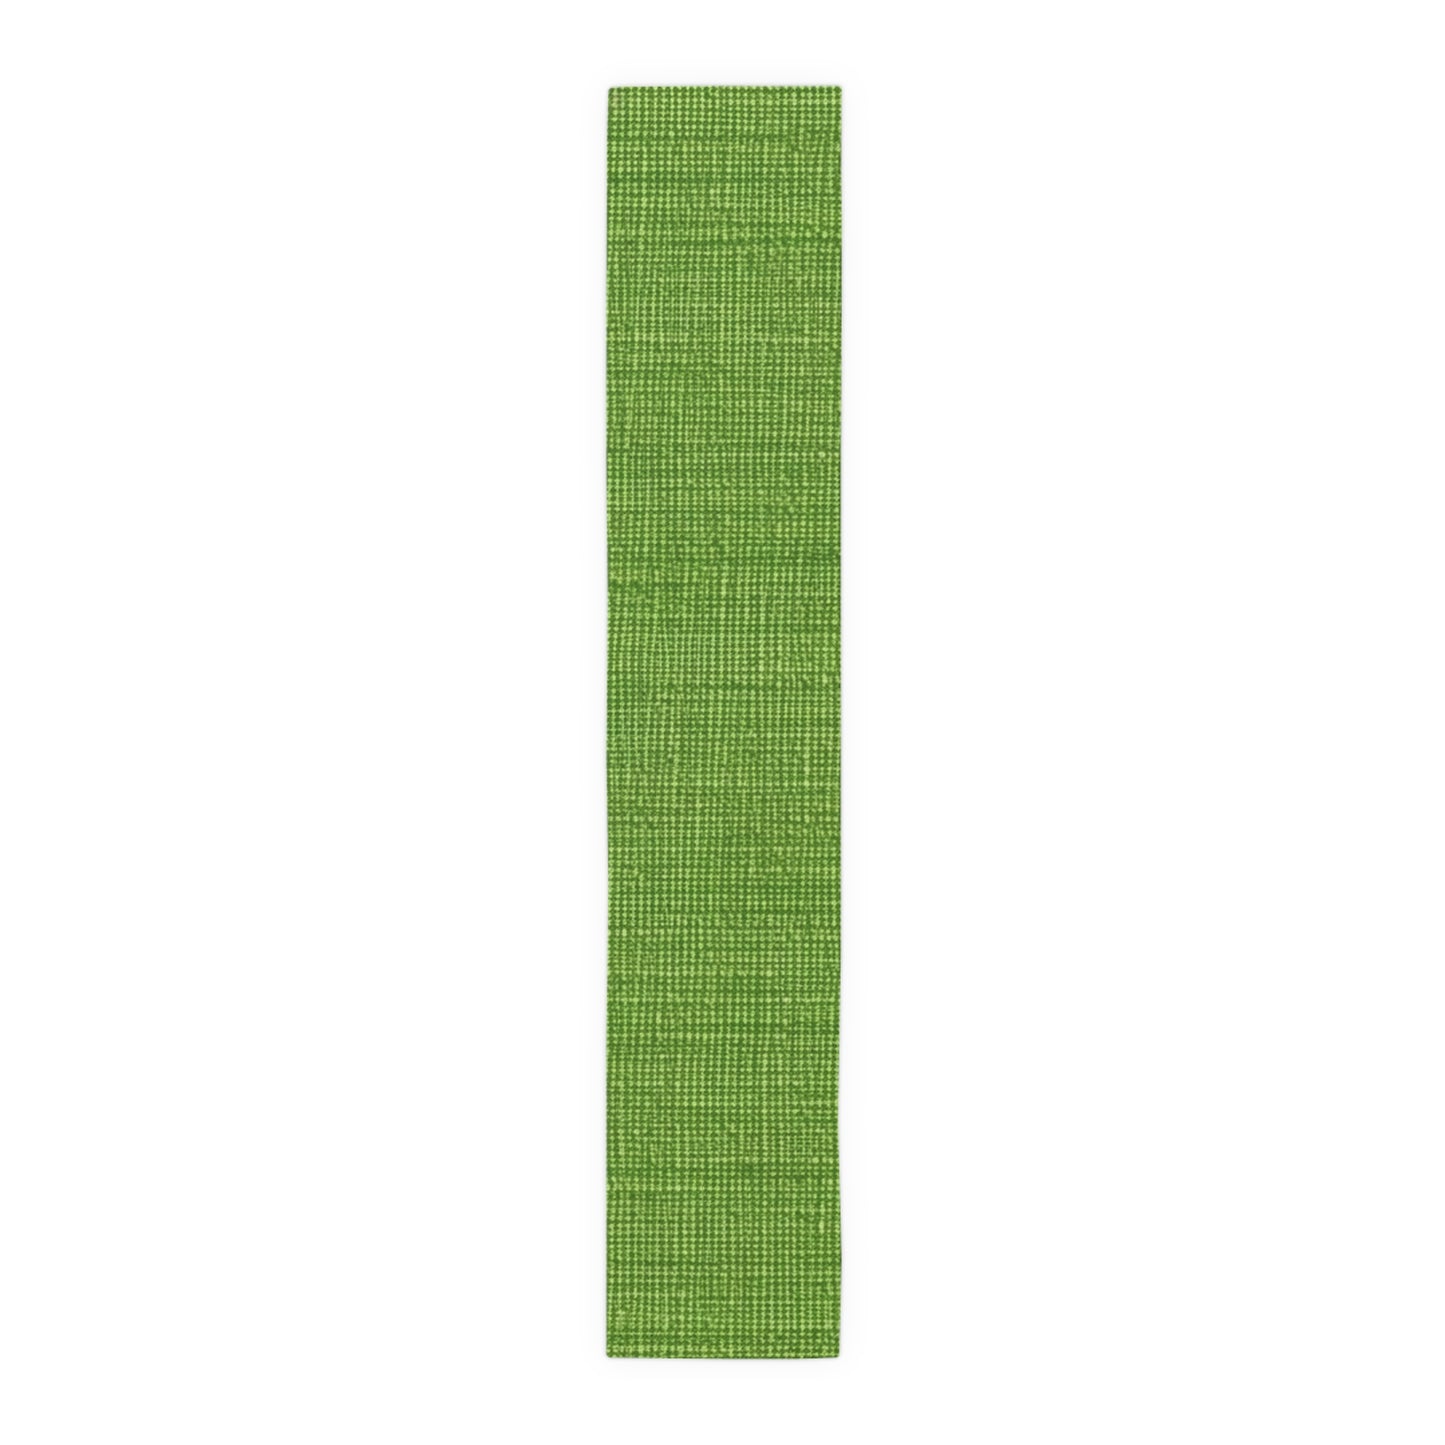 Olive Green Denim-Style: Seamless, Textured Fabric - Table Runner (Cotton, Poly)